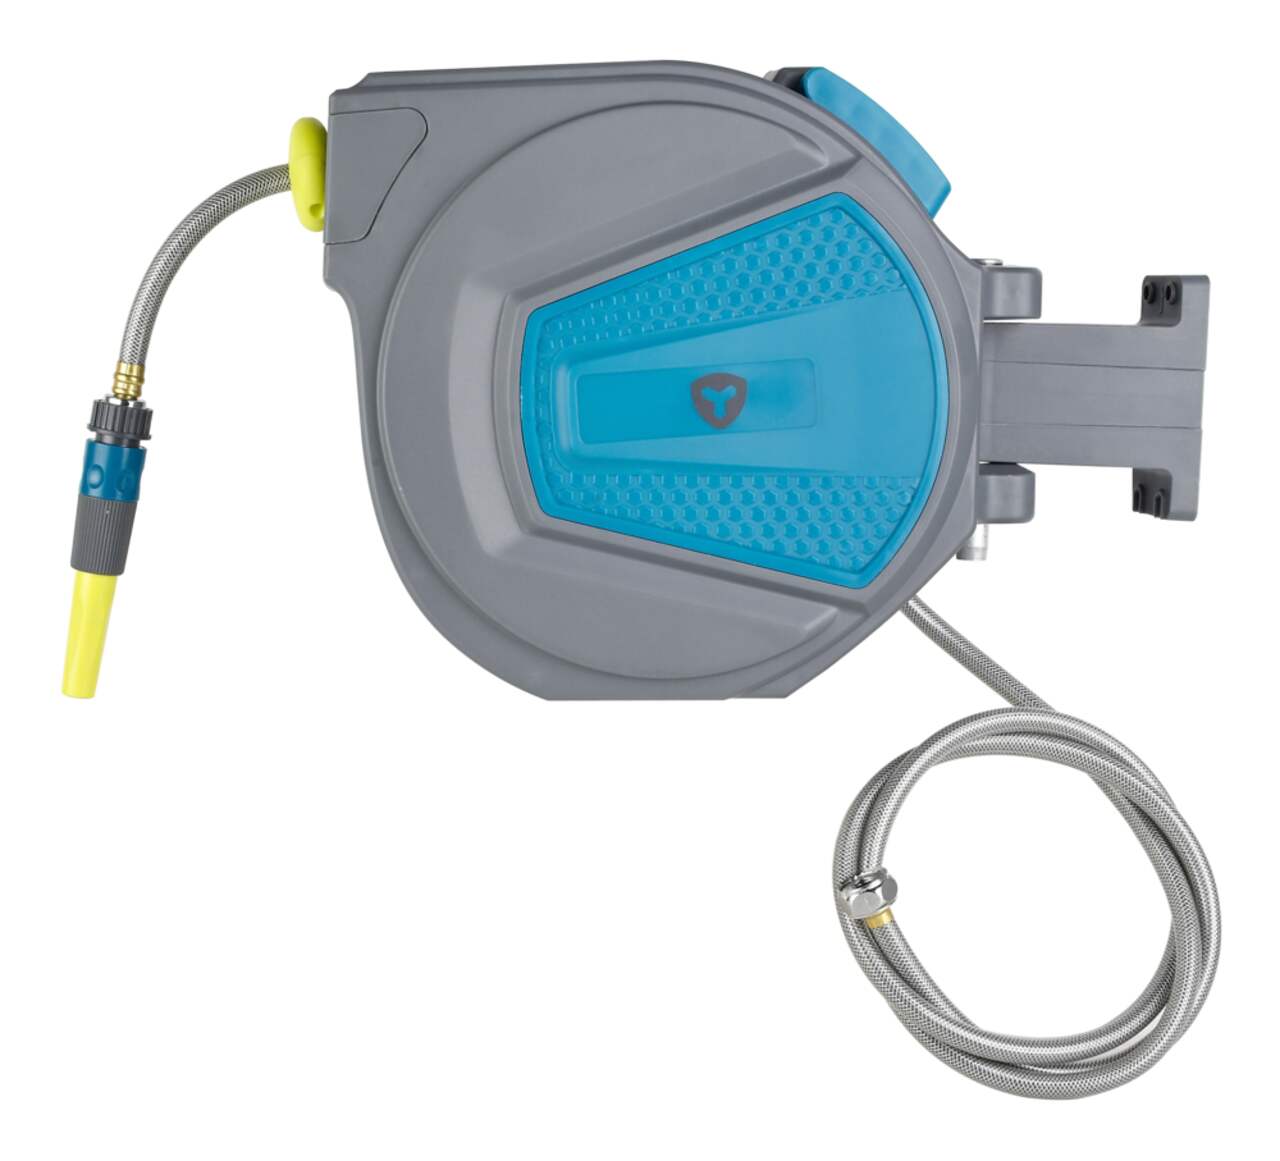 Yardworks Wall Mounted Retractable Hose Reel with Nozzle, 65-ft